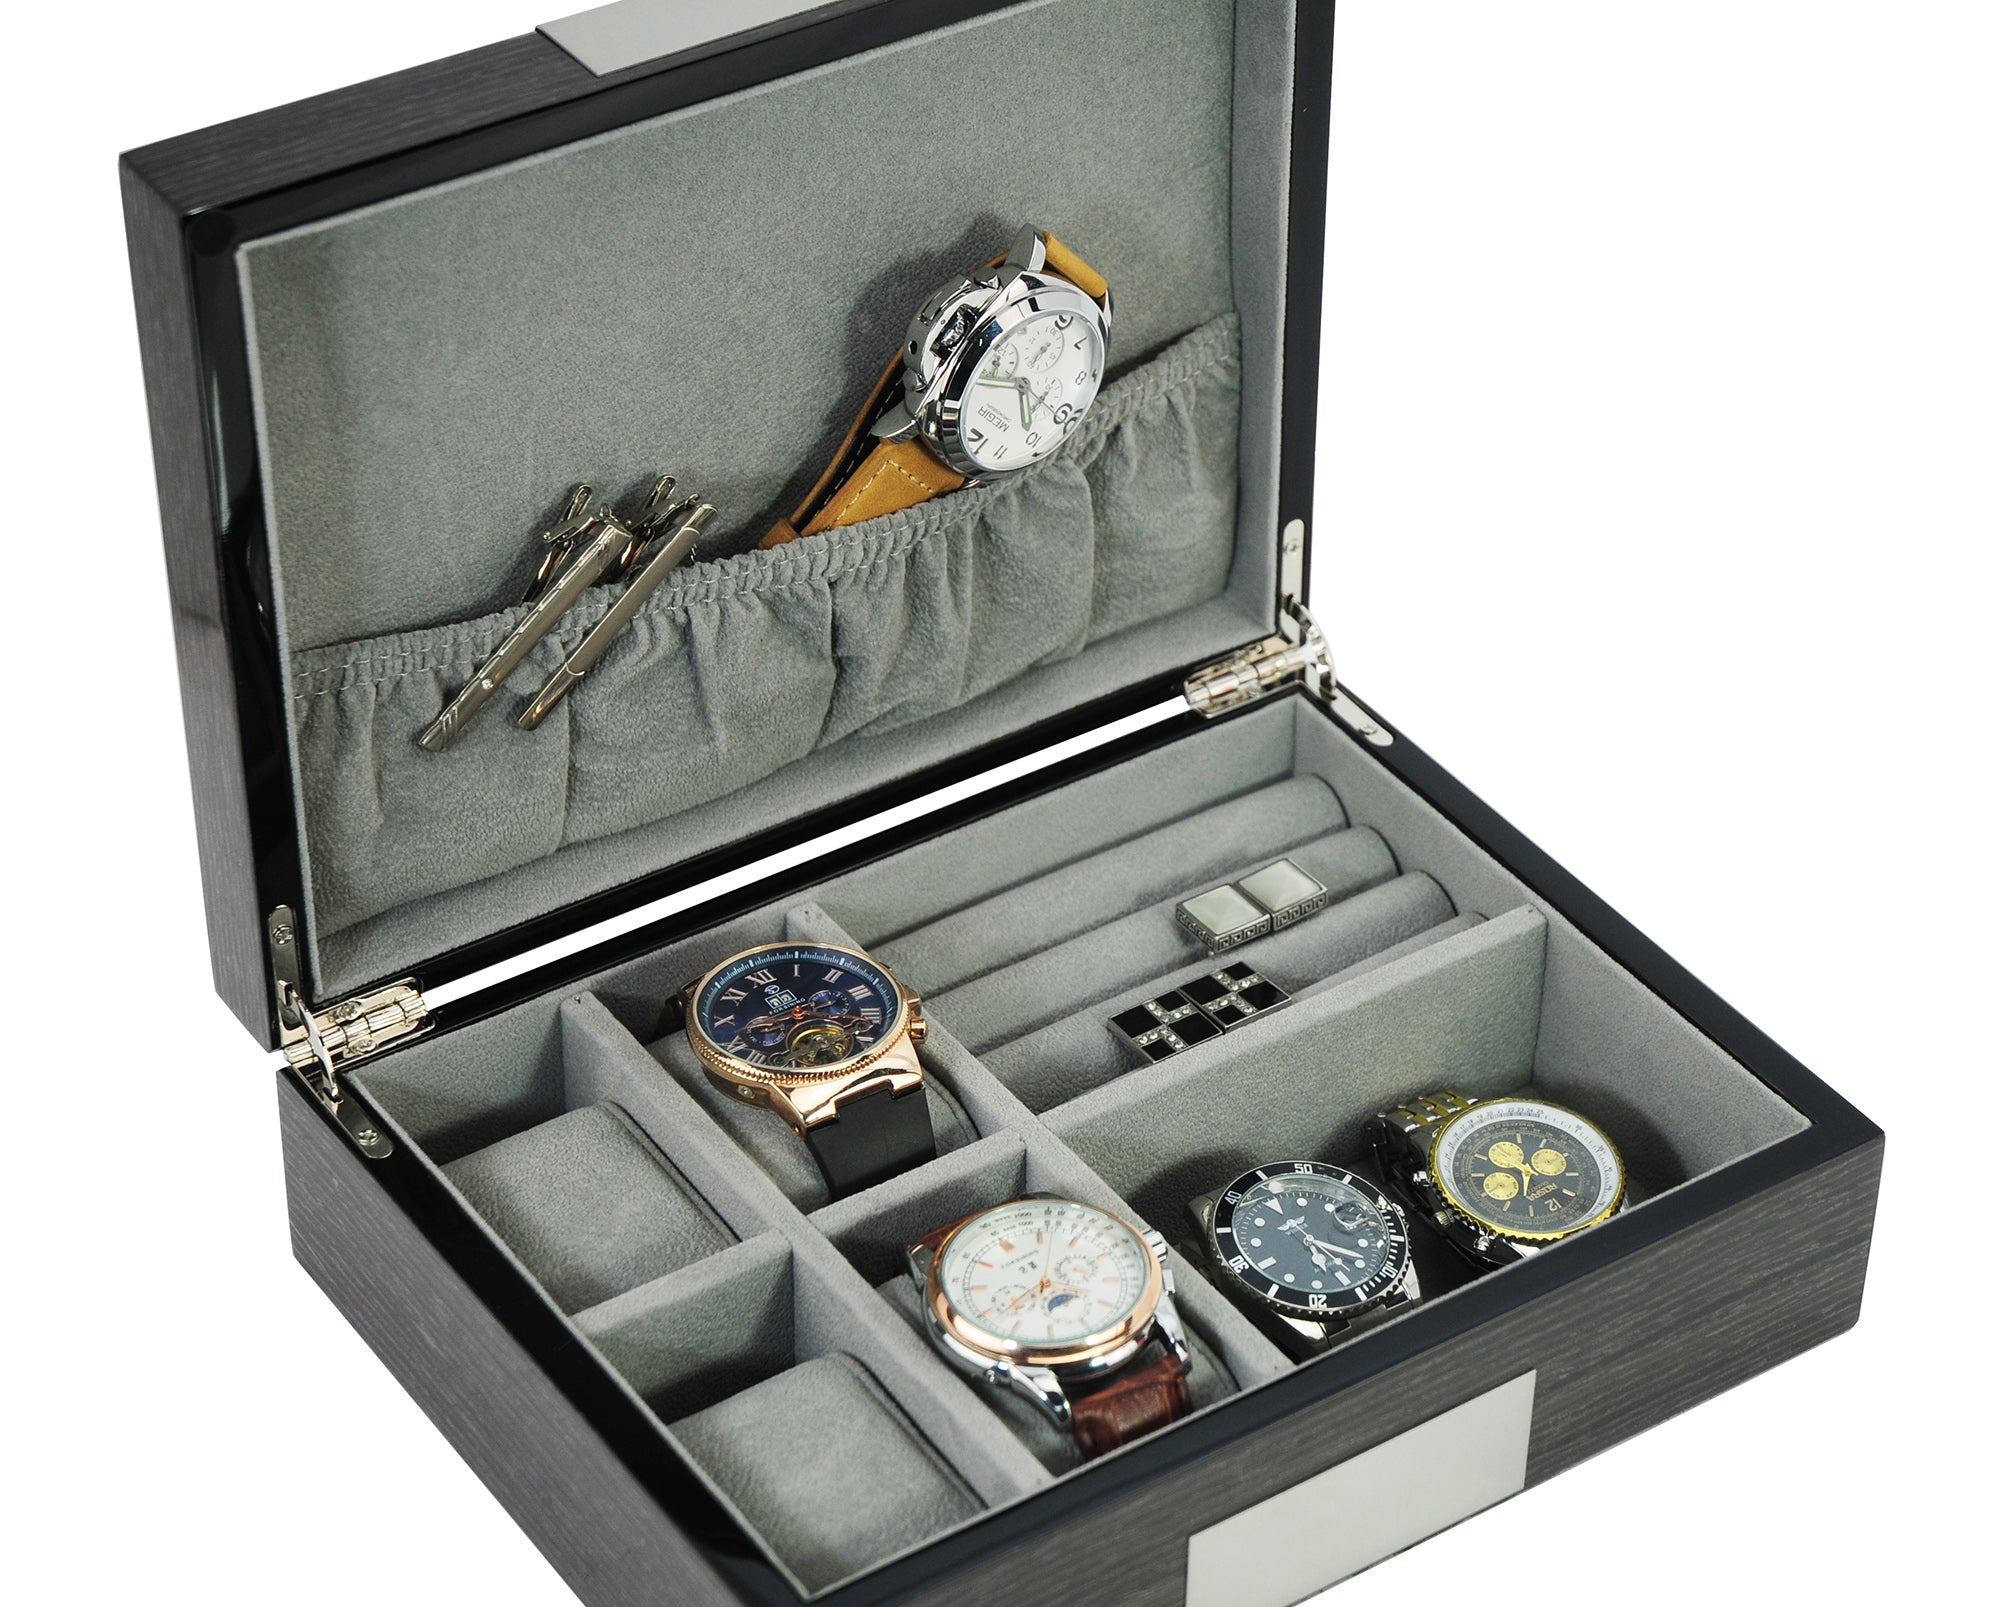 Ikkle Watch Box Organizer for Men and Women, Luxury Wooden Watch Jewelry Box  with Valet Drawer 